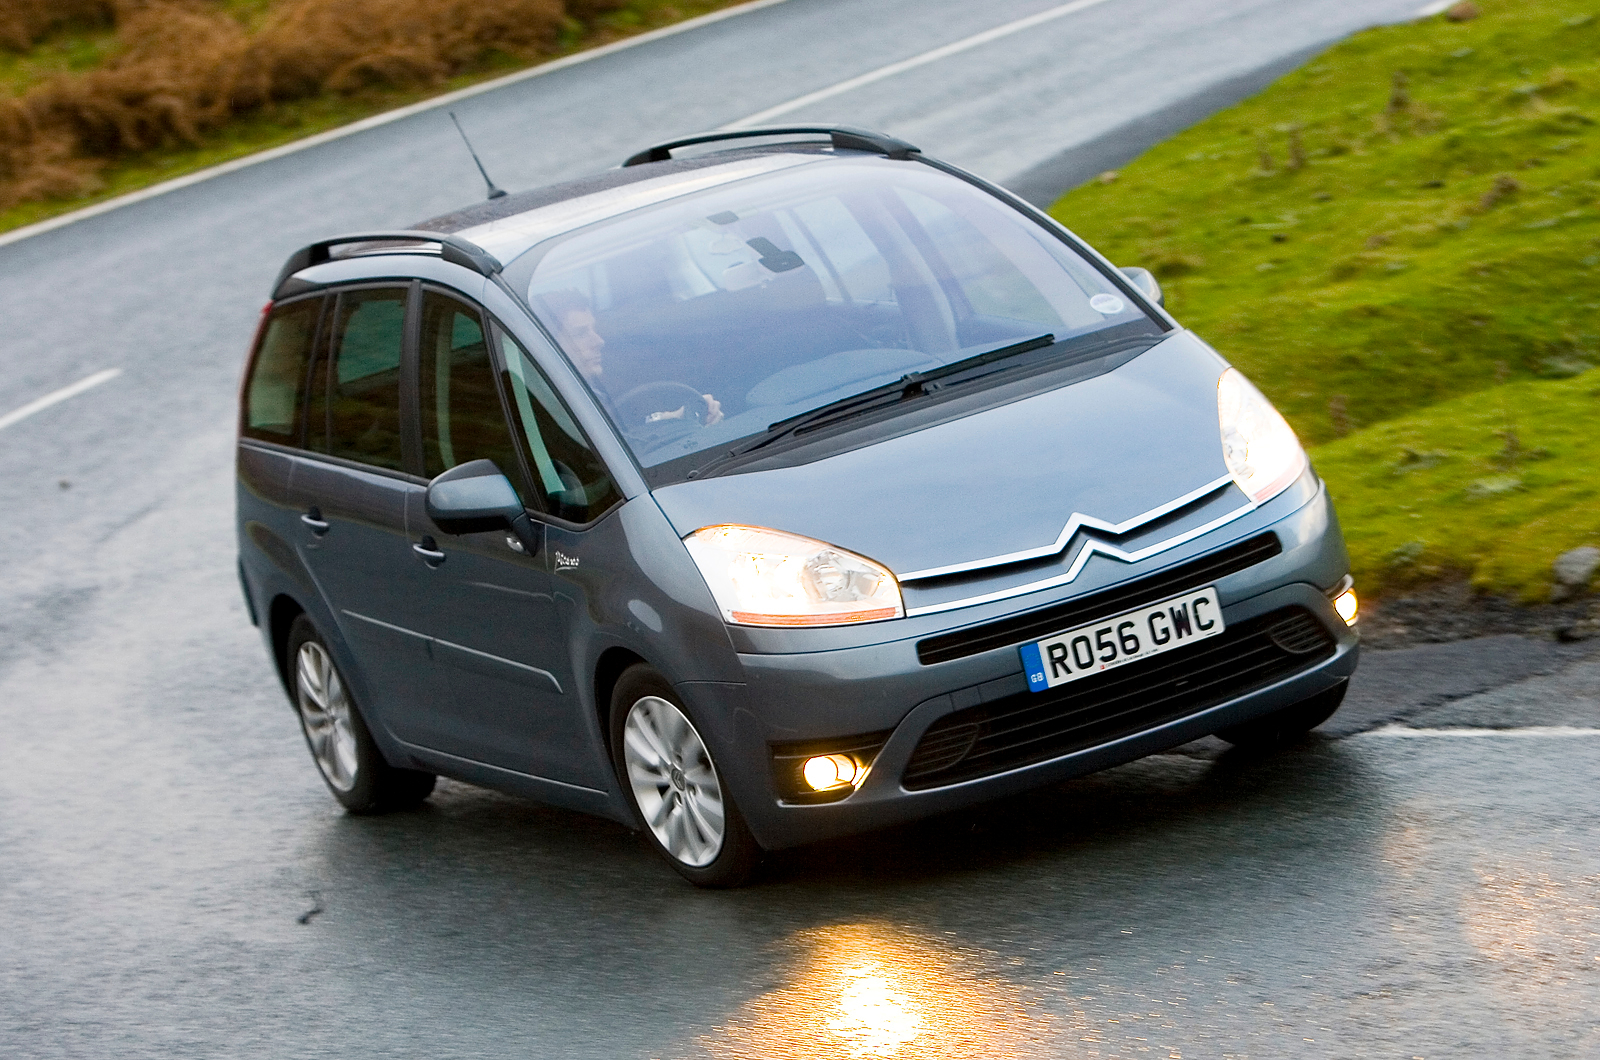 Used Citroen Grand C4 Picasso 2007-2013 review